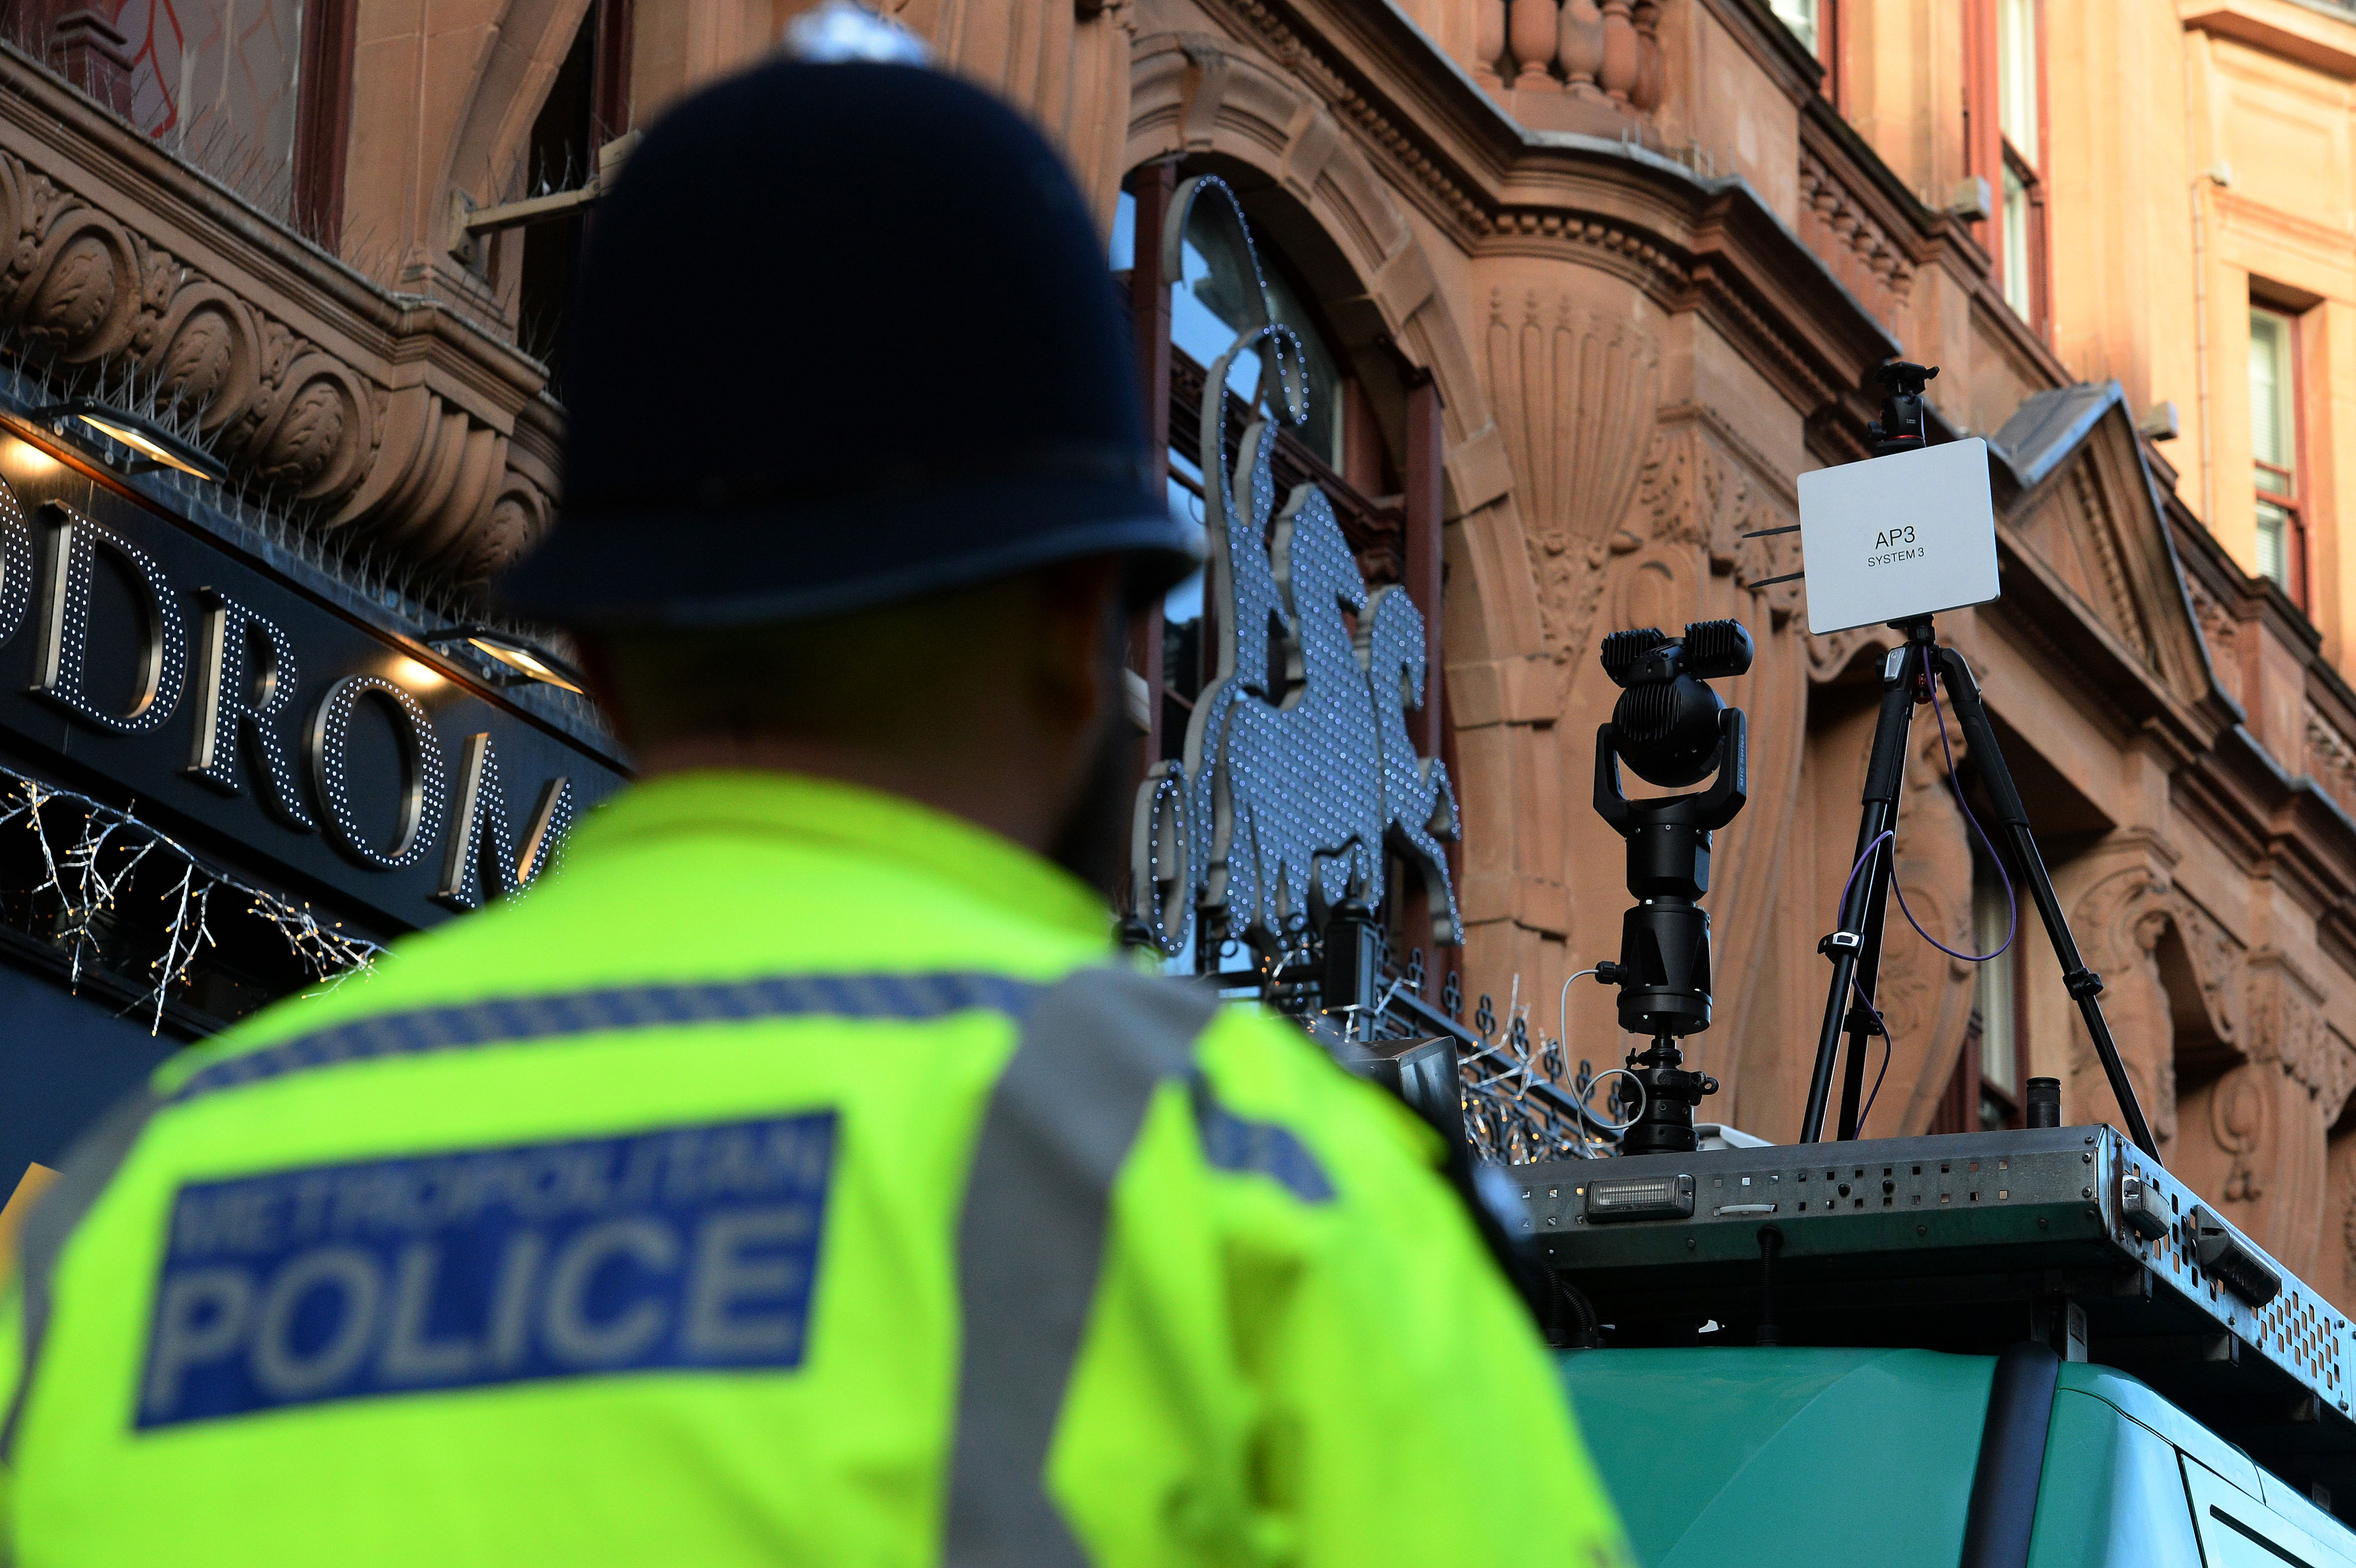 police widening use of live facial scanning with no clear legal grounds – peers